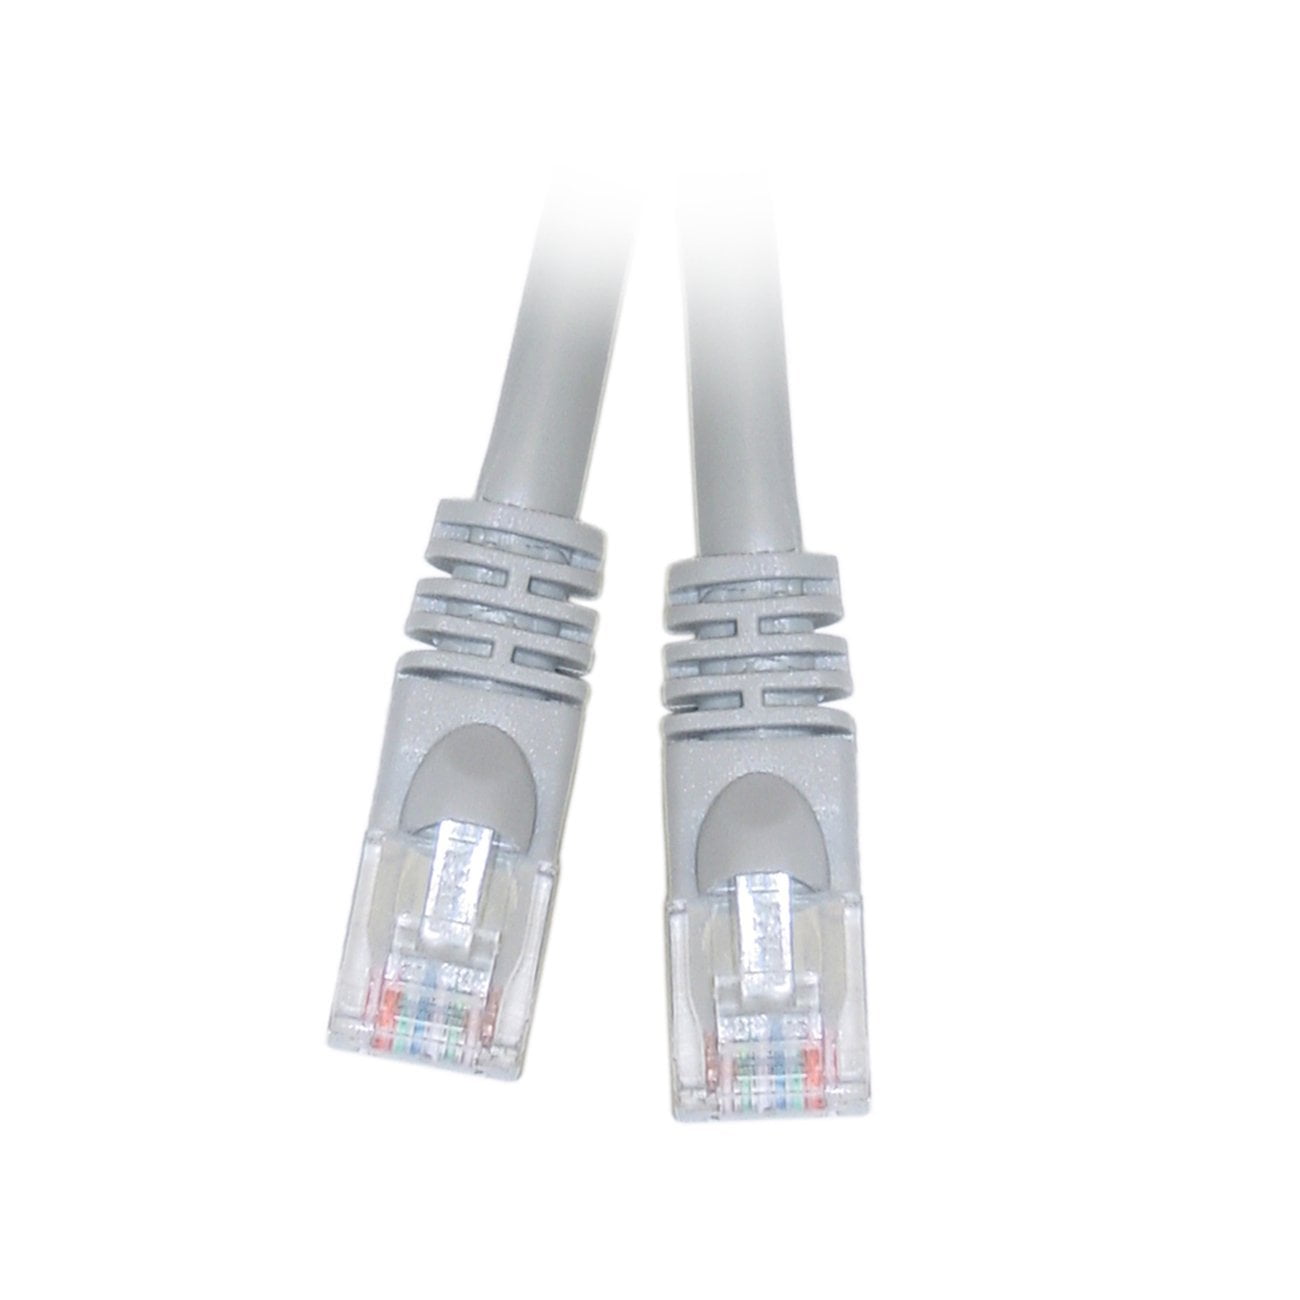 2 Pack CCA 25ft Molded UTP Cat5e Network Cable Grey 